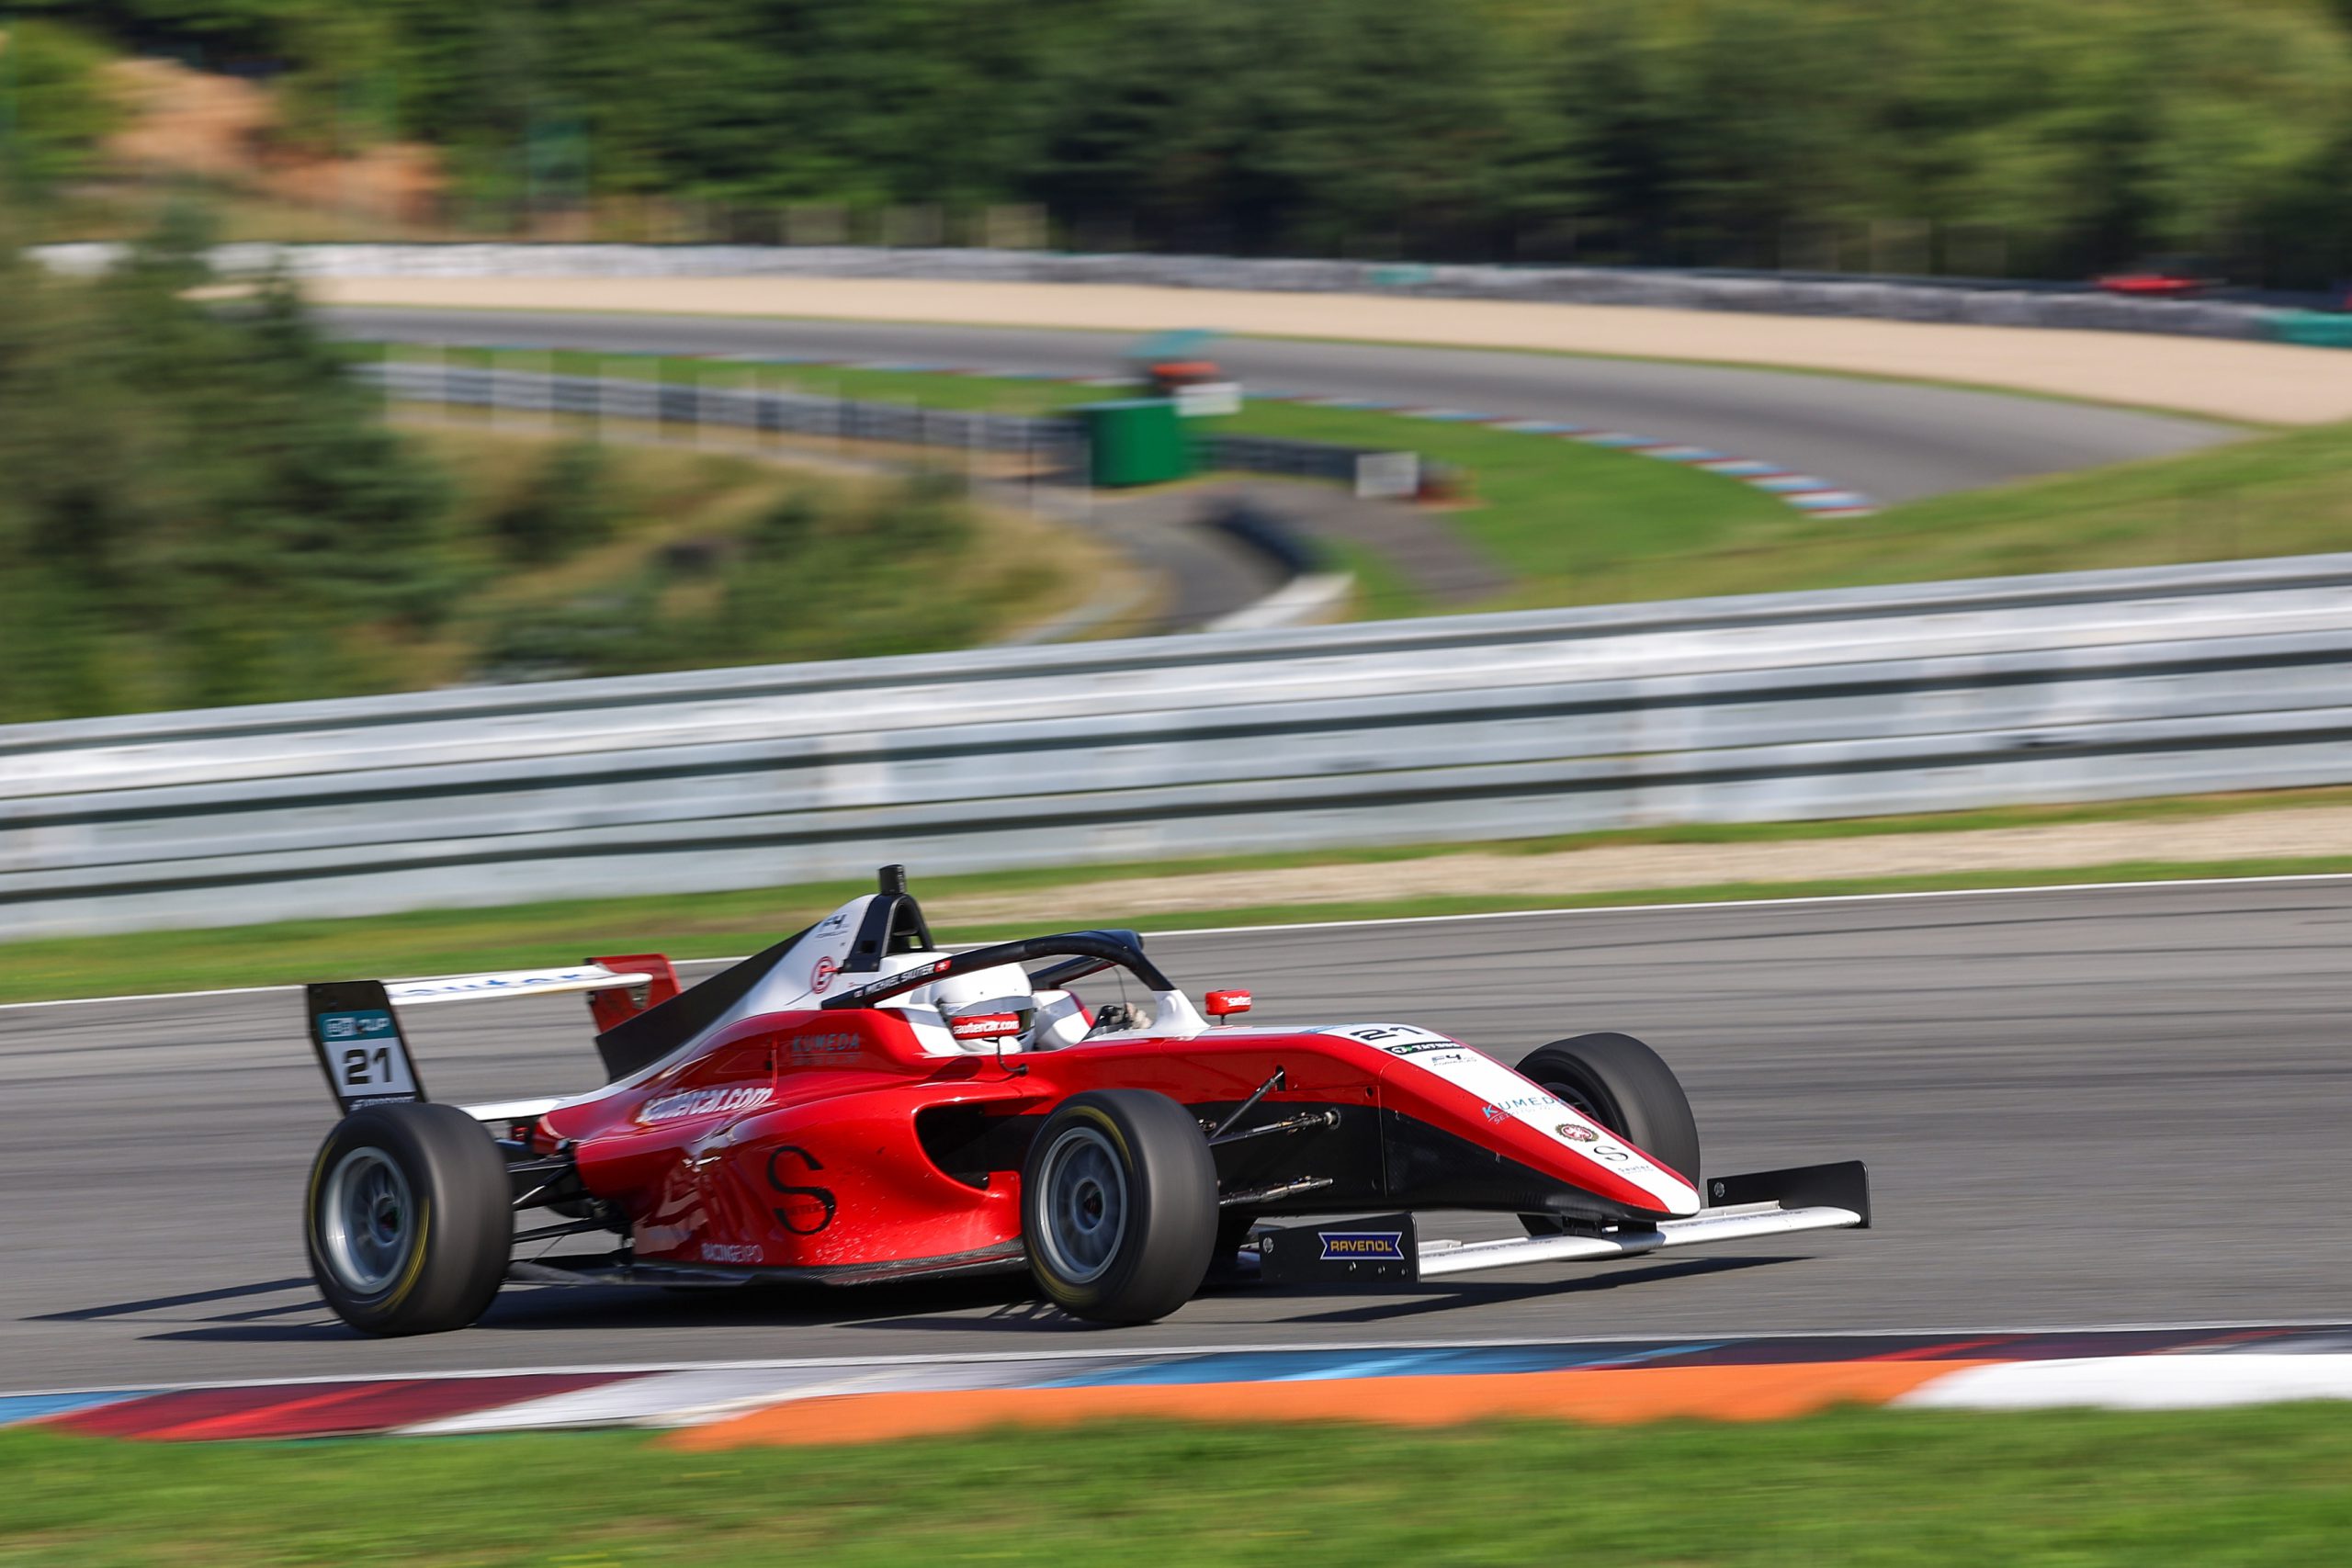 Balaton Park confirmed, it will conclude the F4 CEZ season on October 8th